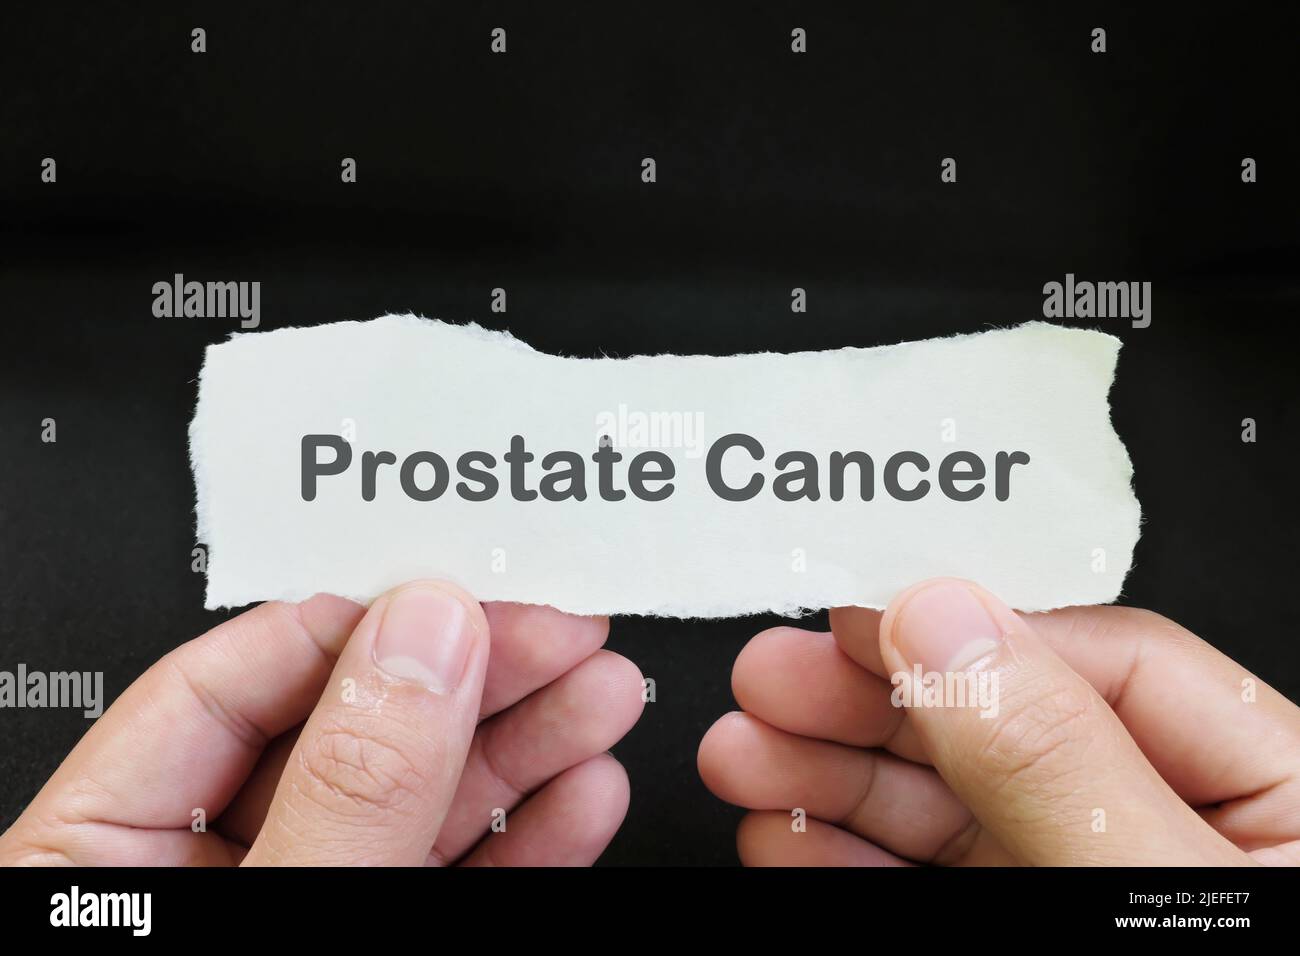 Prostate Cancer diagnosis concept. Hand holding paper with written word text in dark black background. Stock Photo